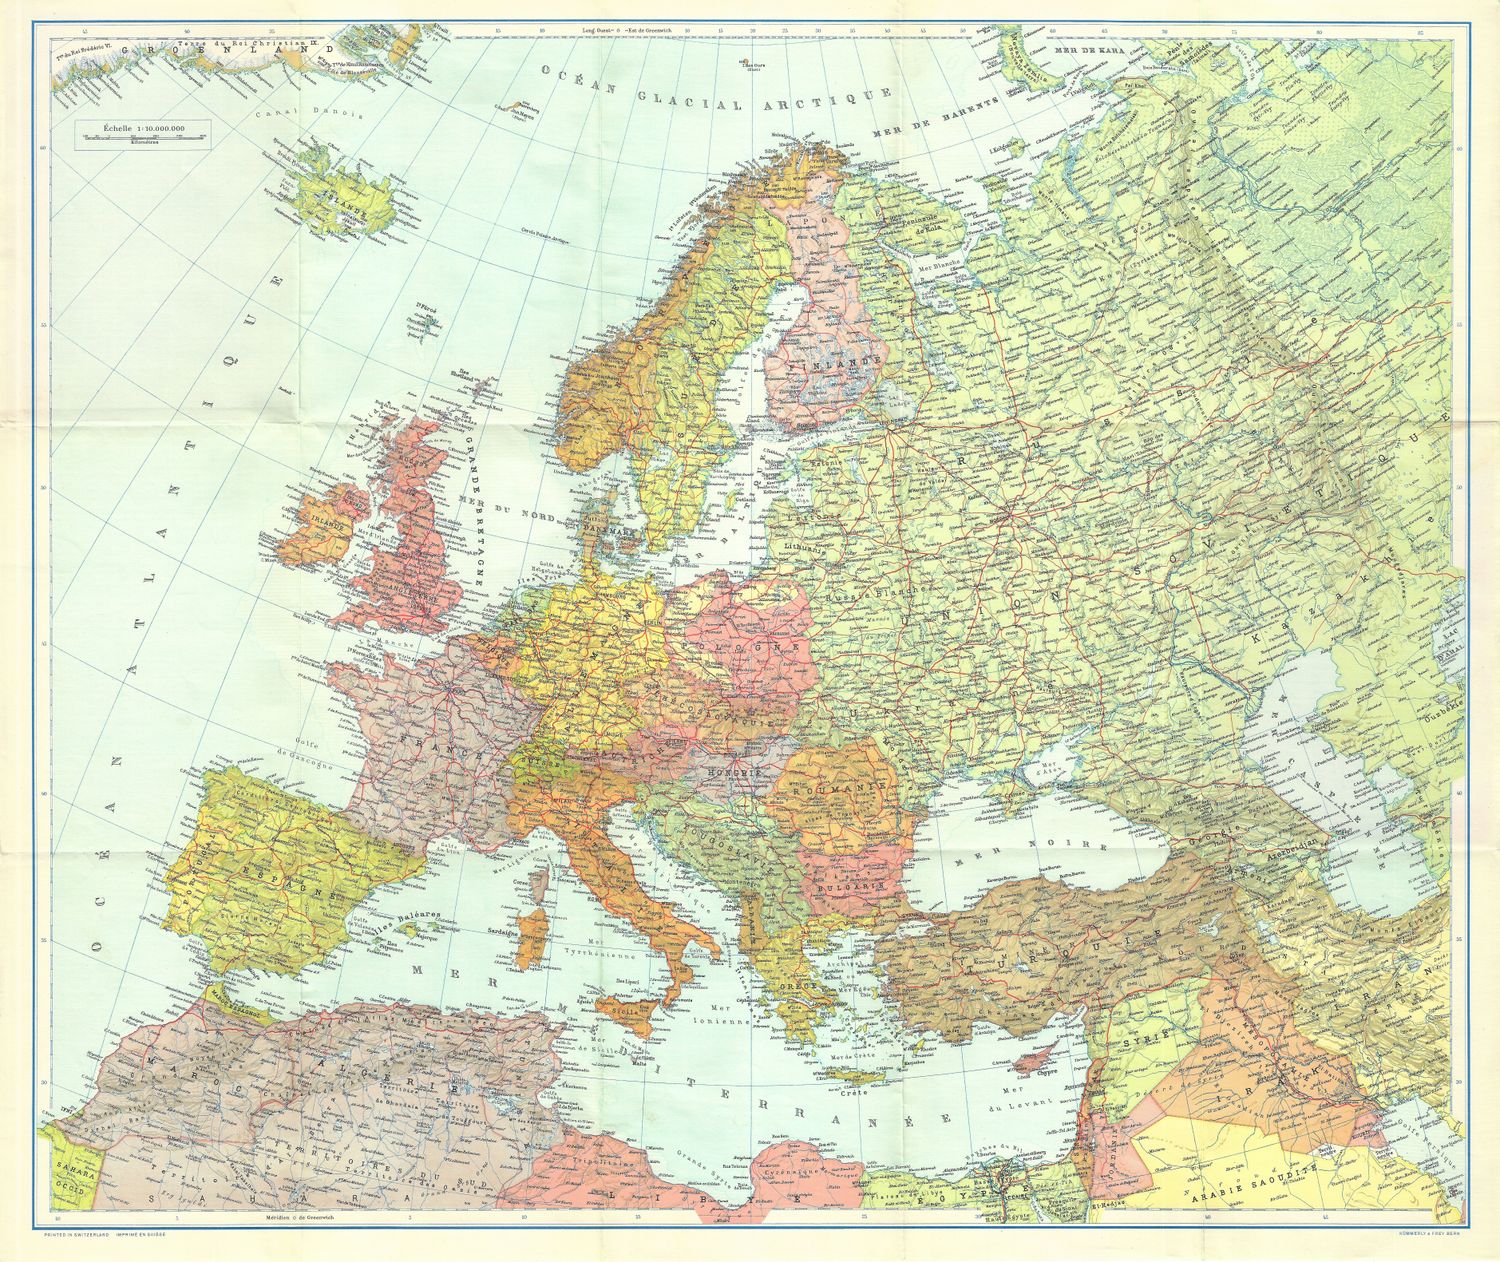 1945 Map of Europe by Kummerly and Frey